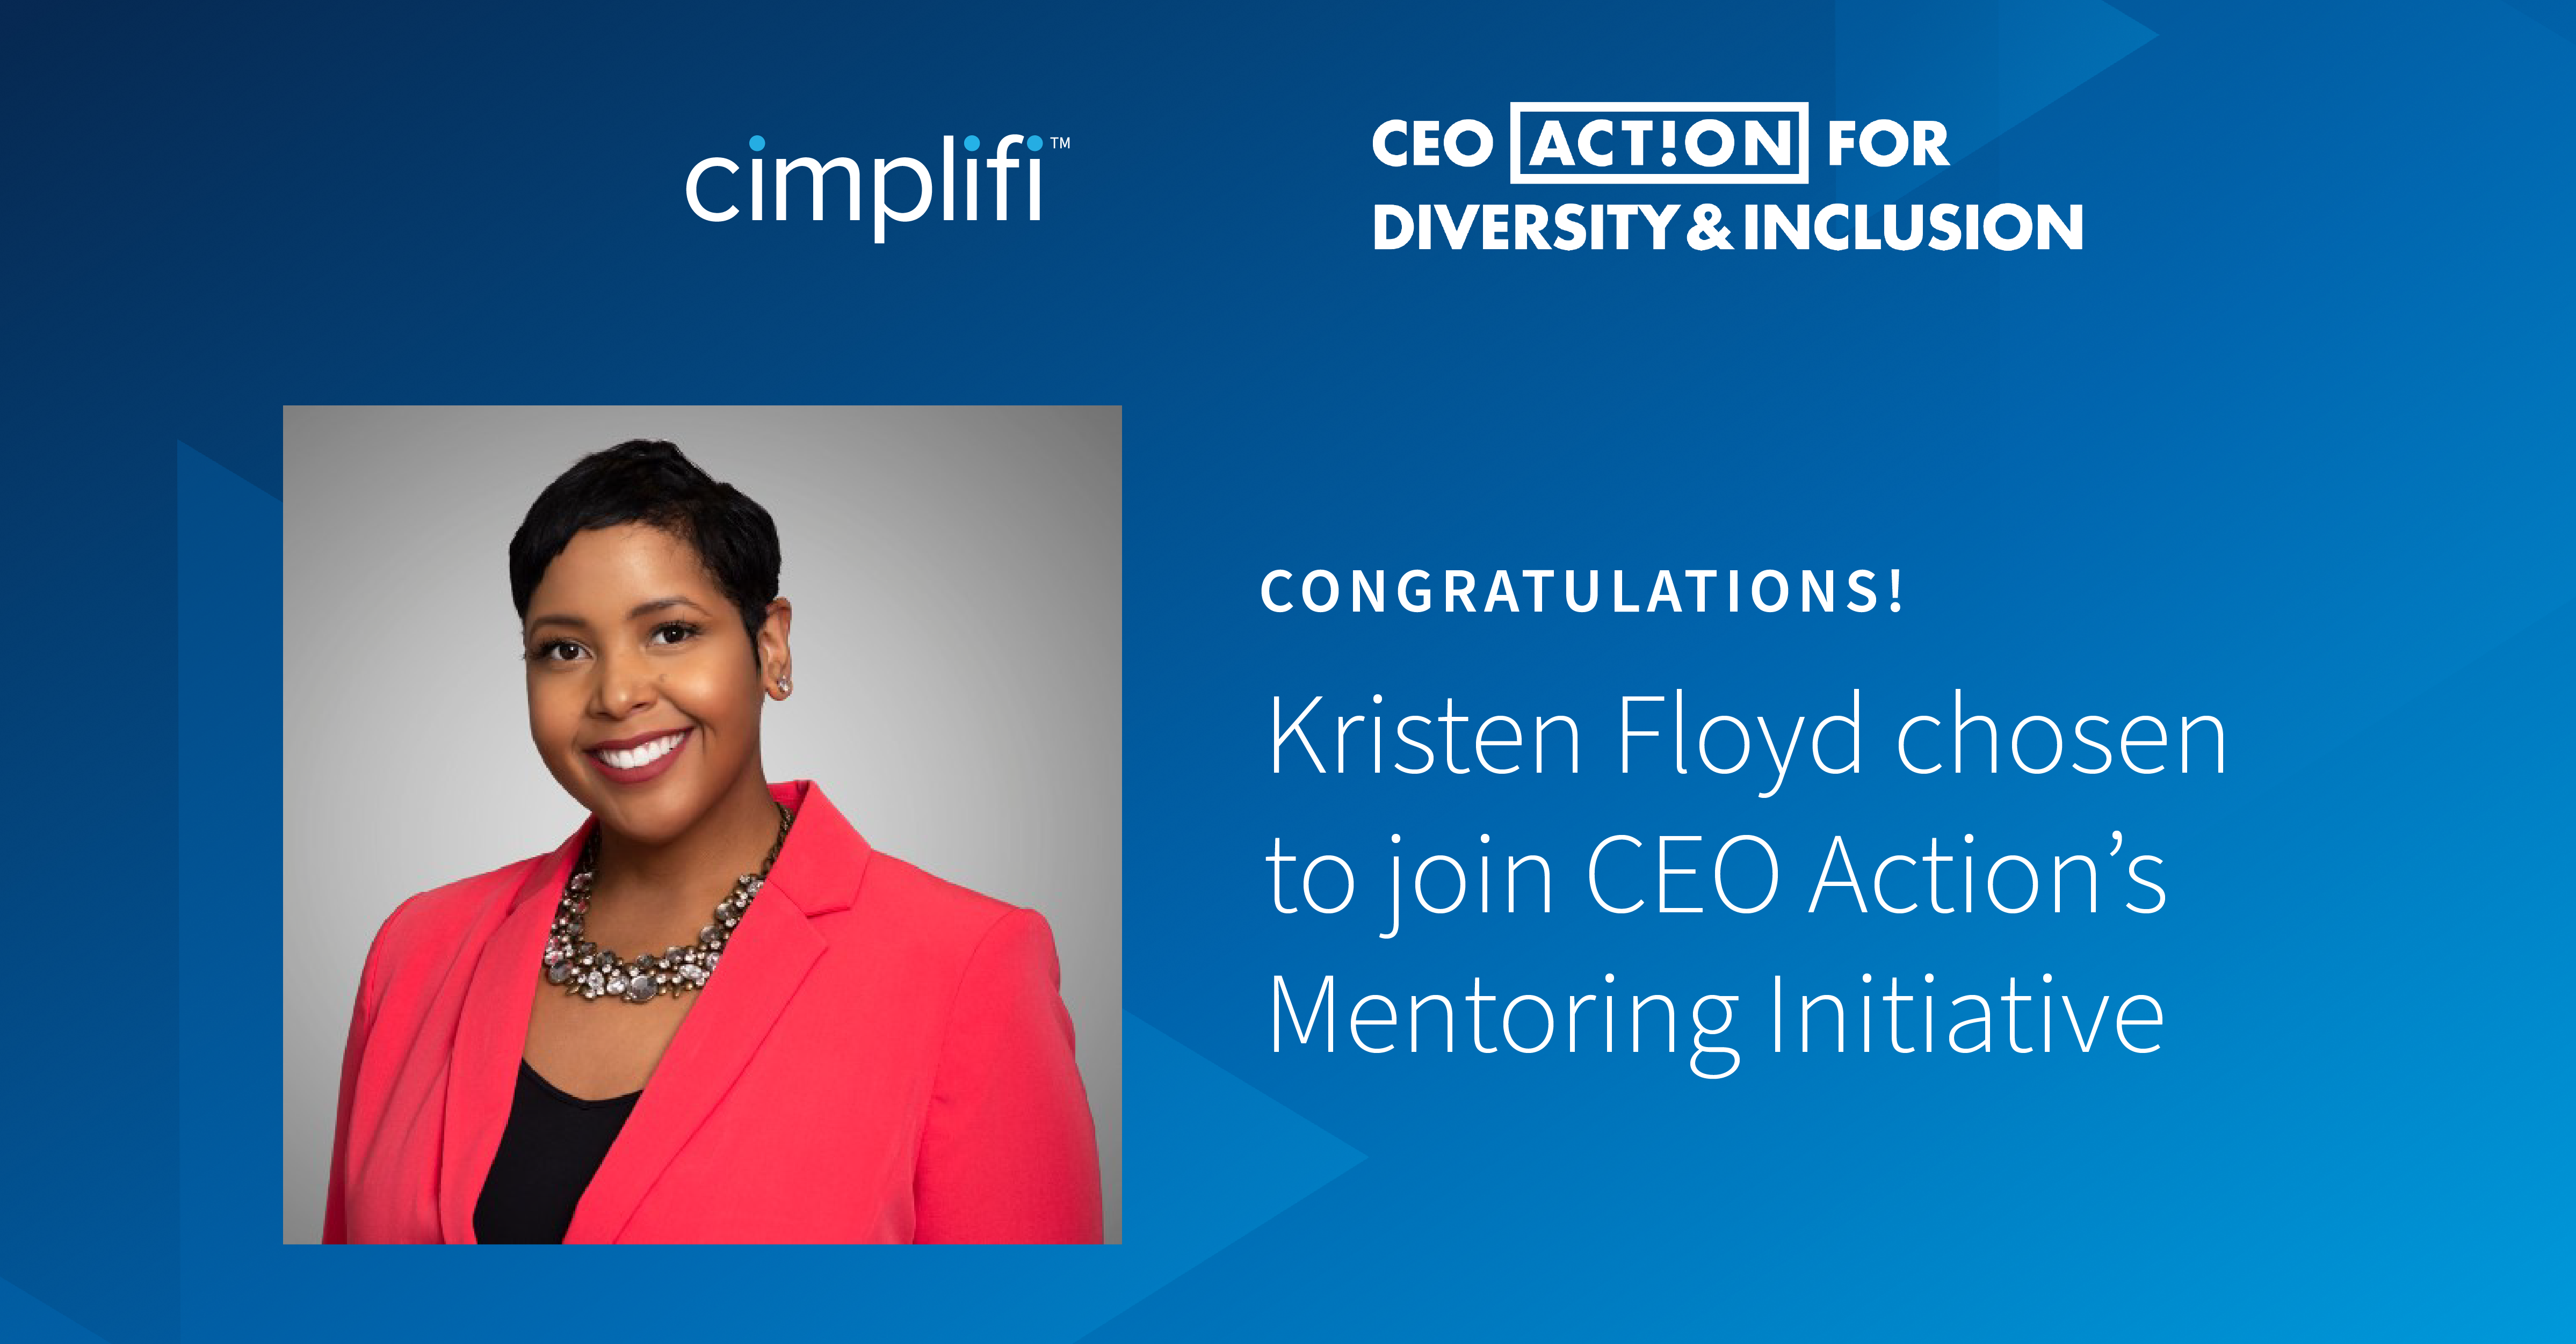 Cimplifi™ DEI Leader to Join CEO Action’s Mentoring Initiative